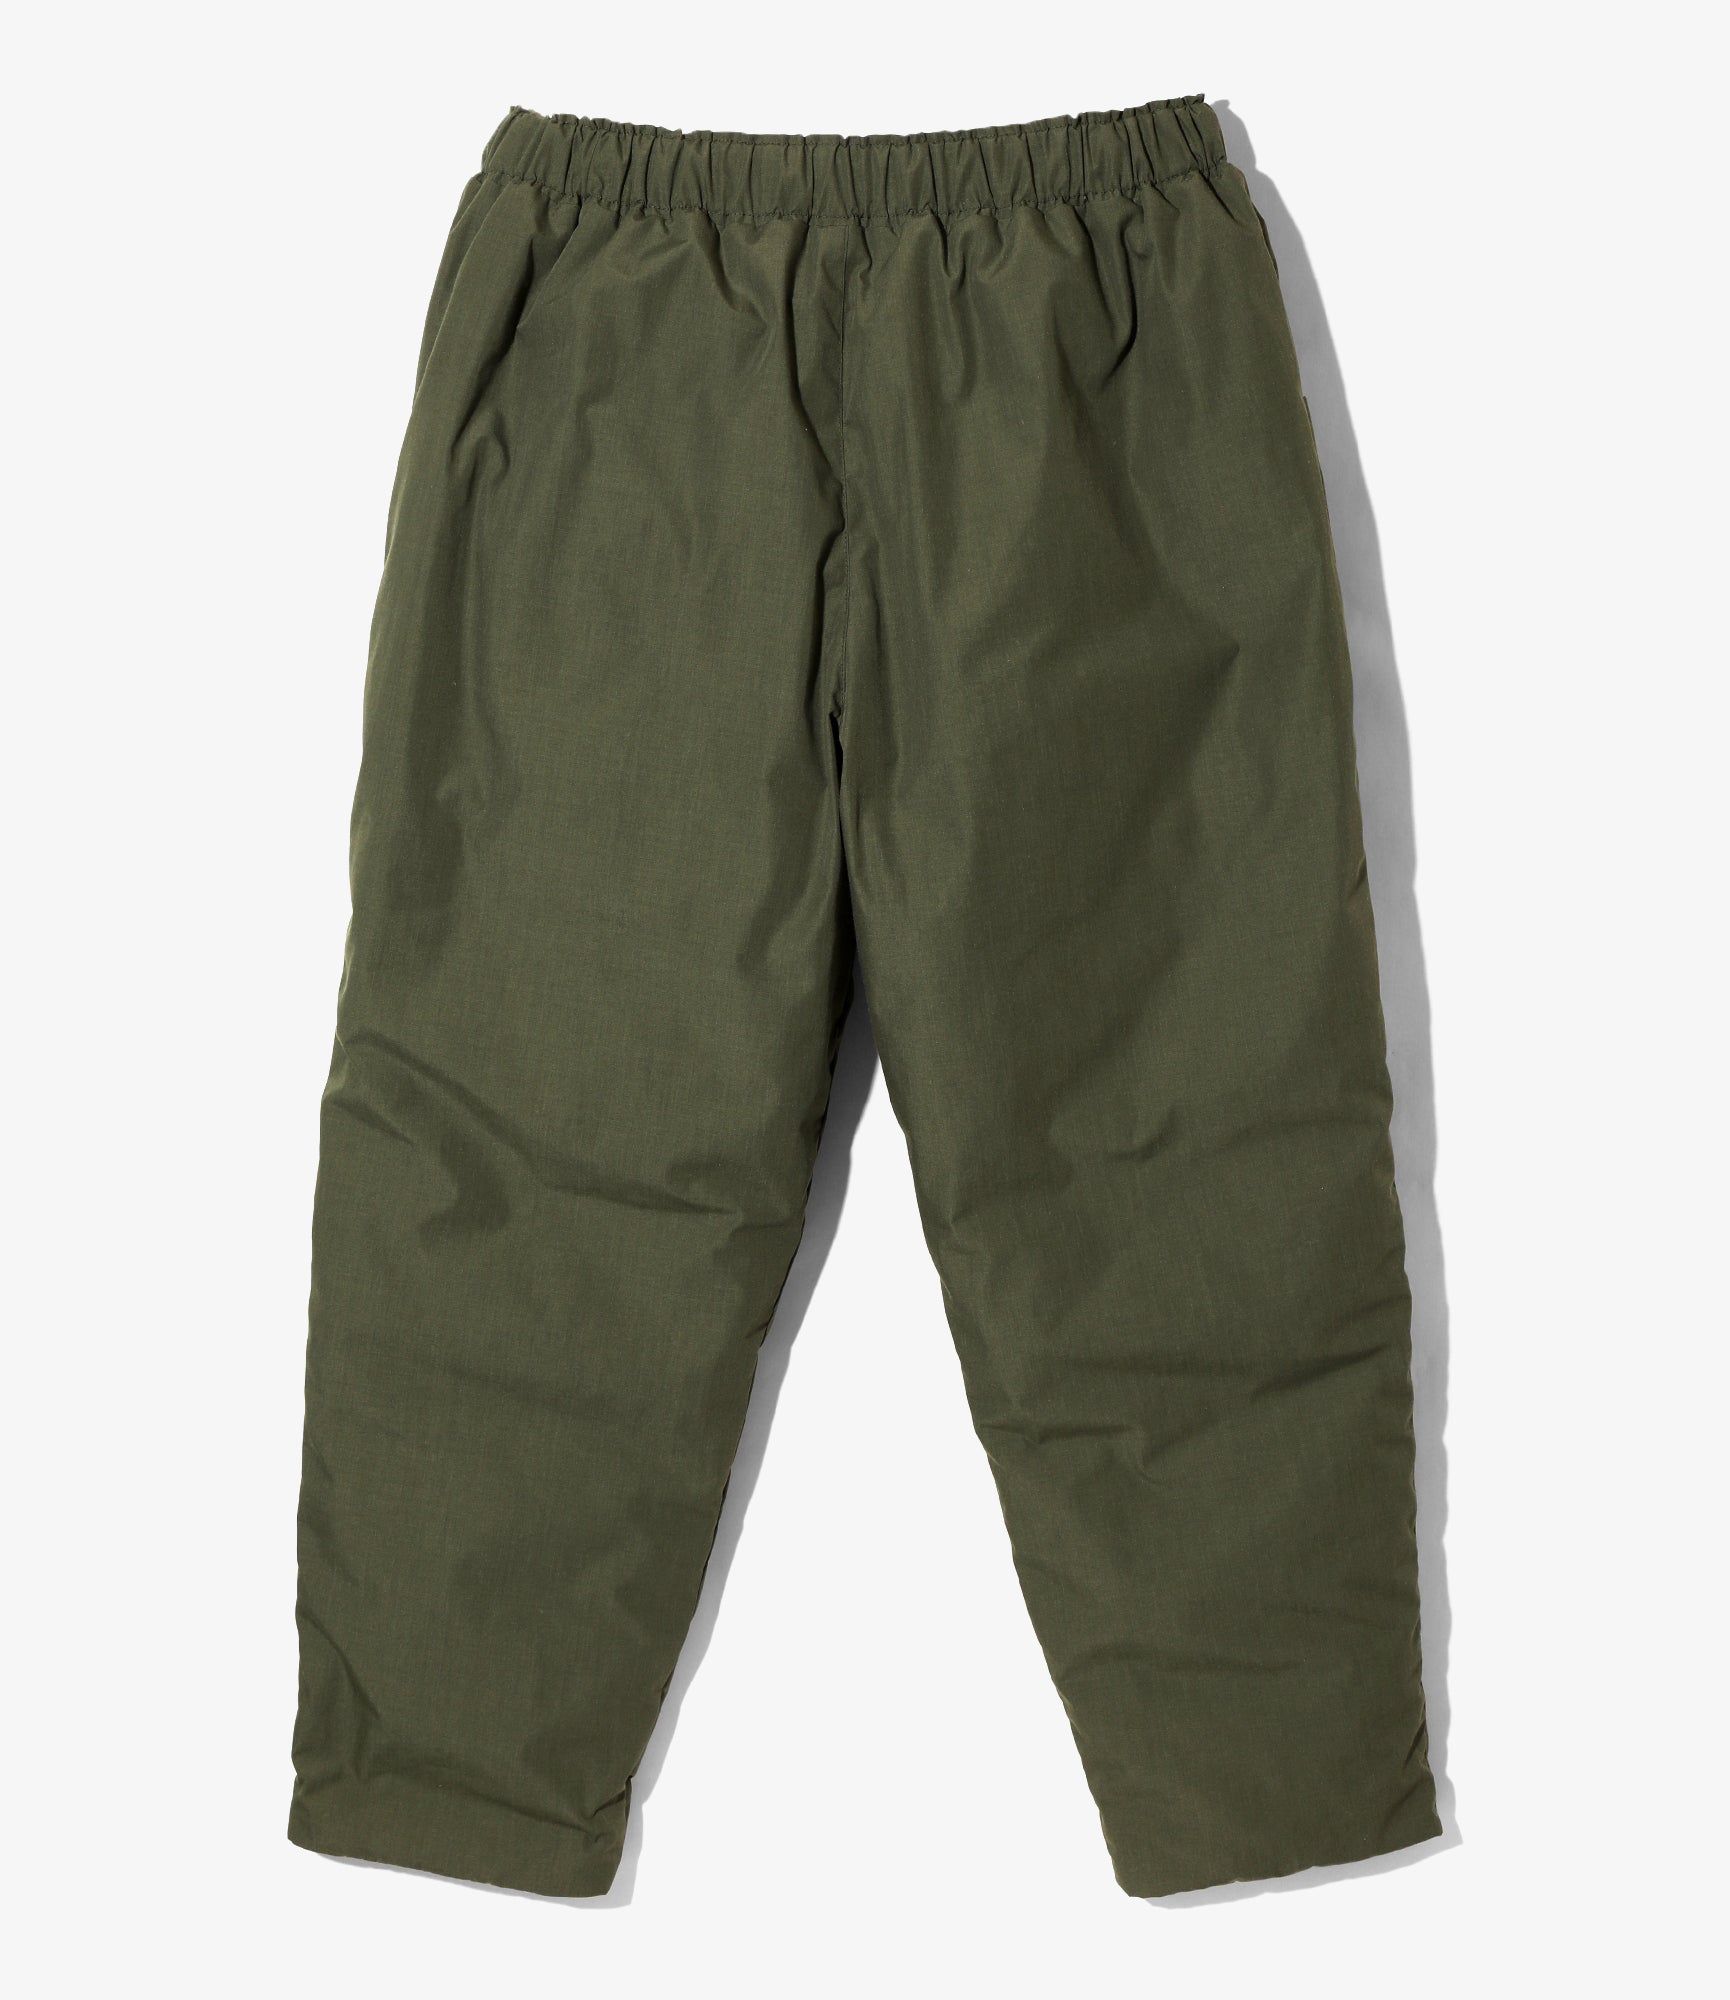 South2 West8 x Nanga - Belted C.S. Pant - Olive - Flame Resistant